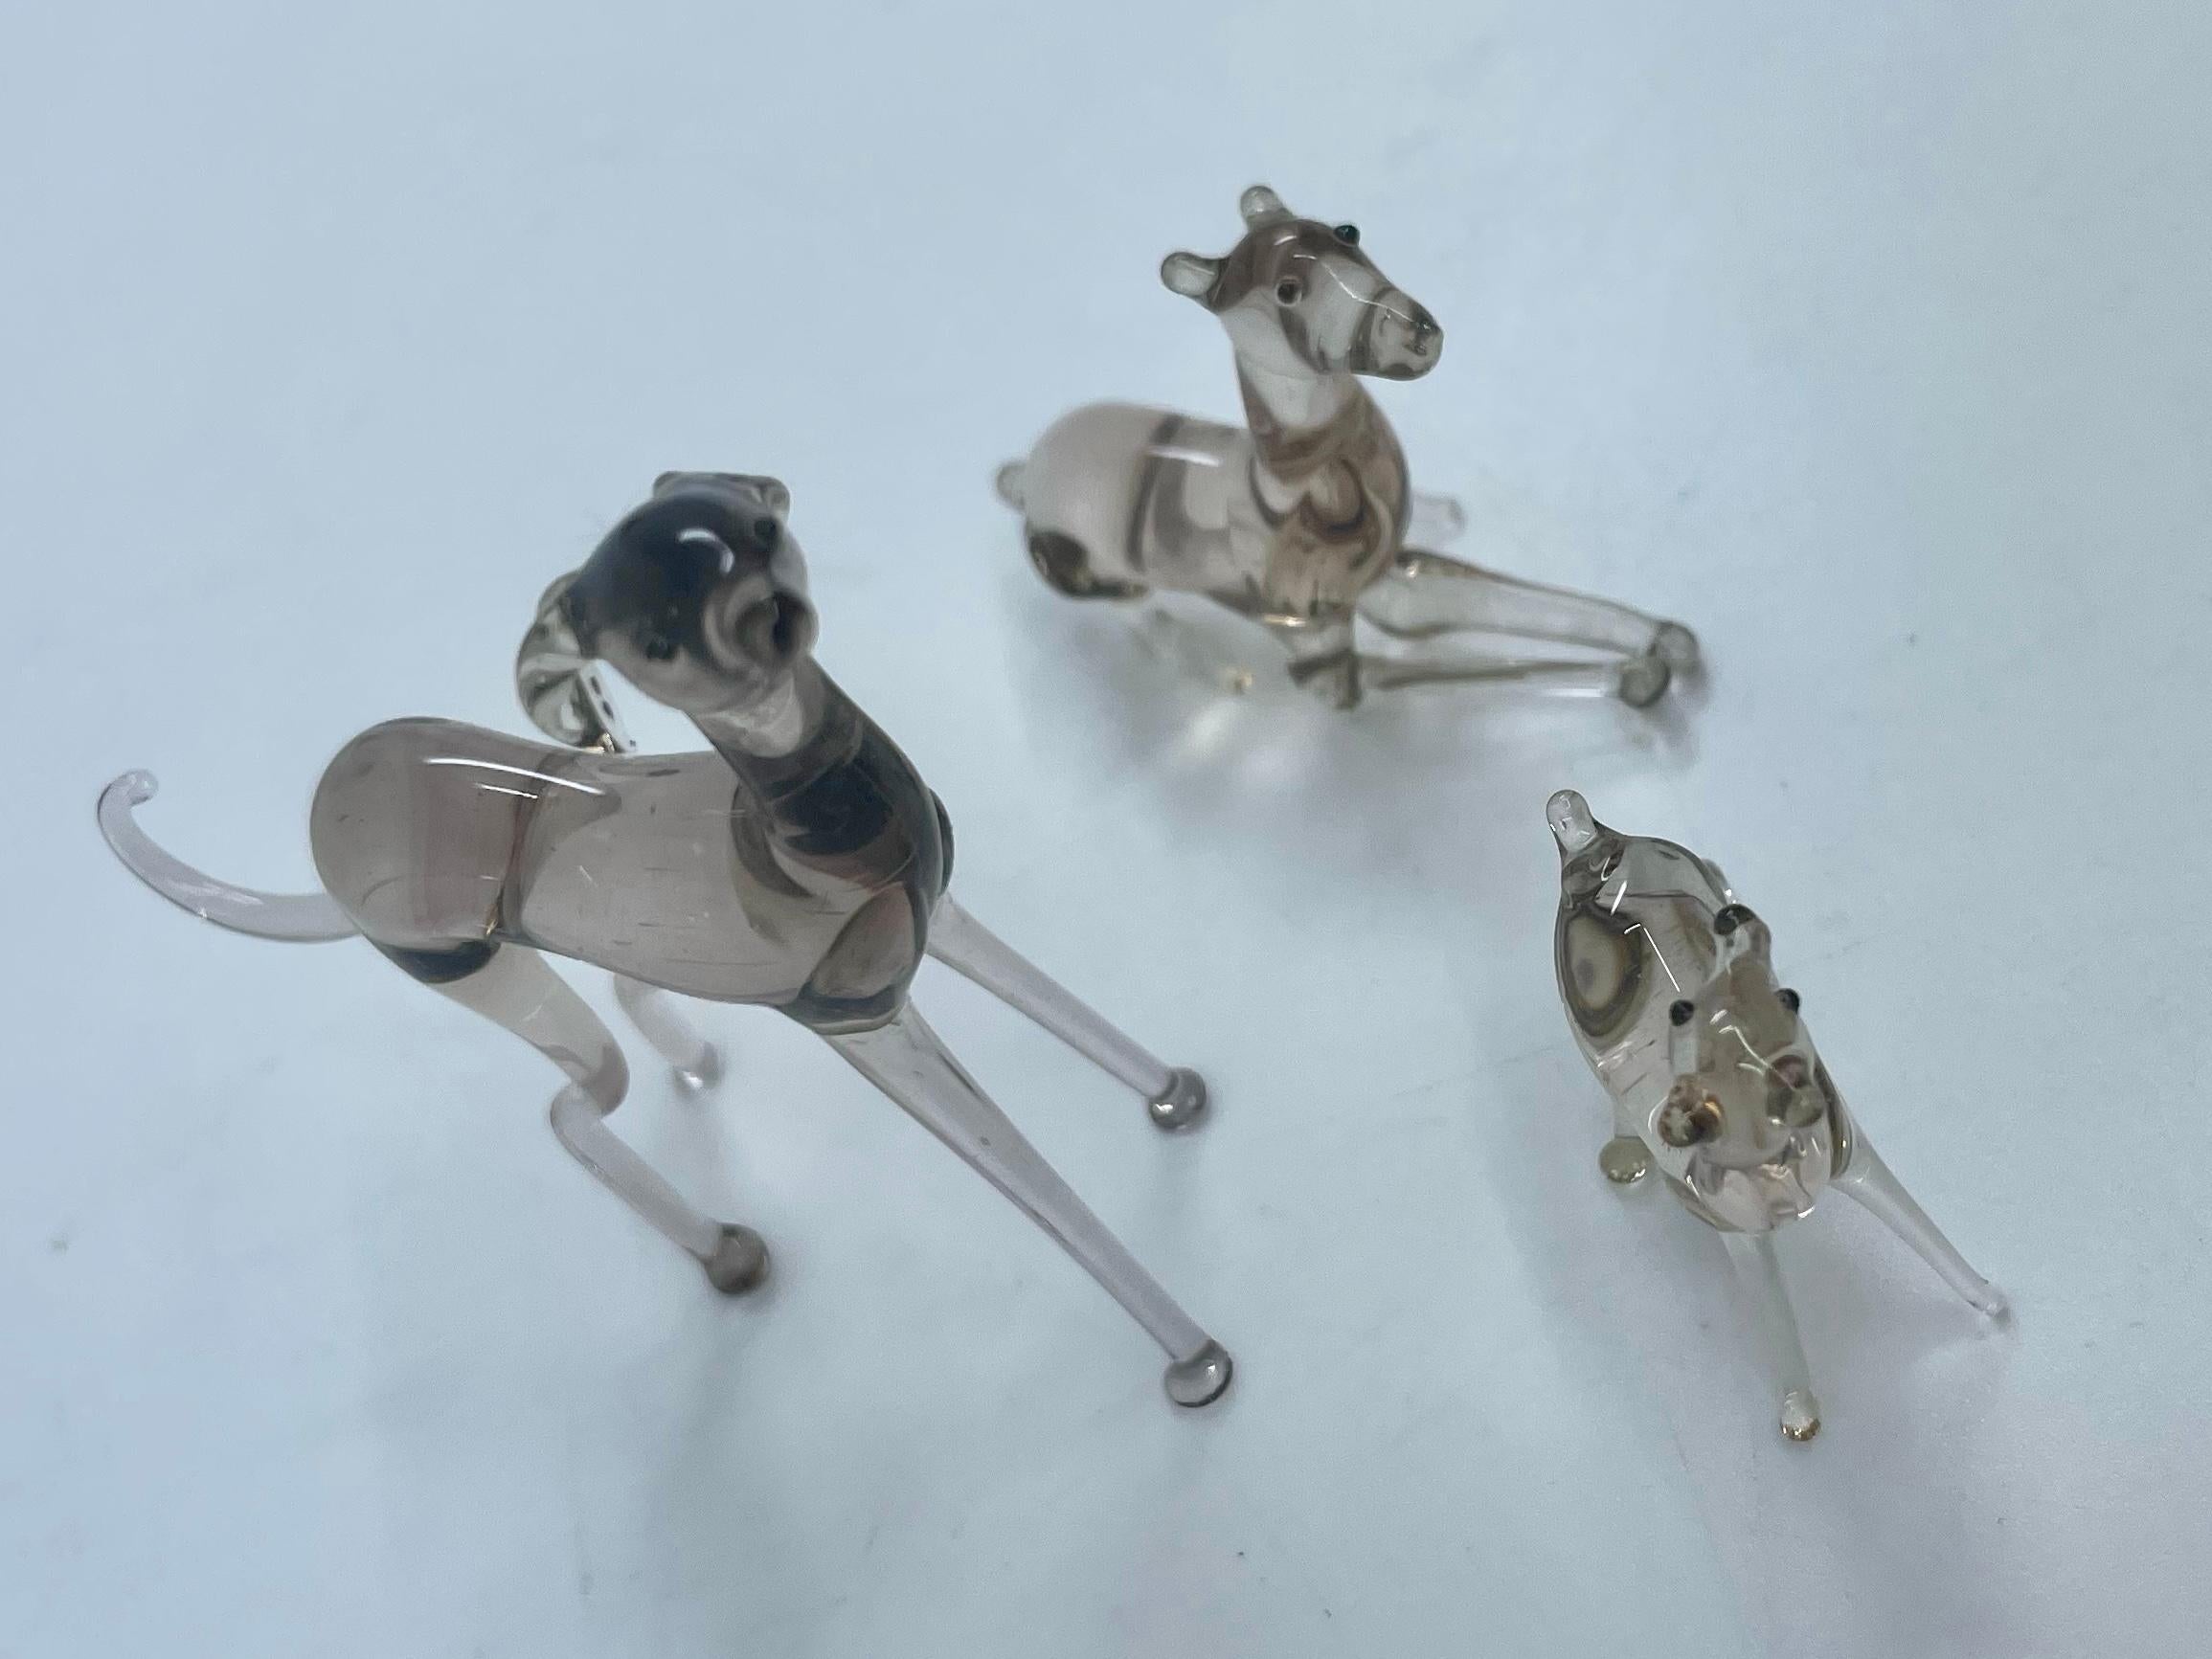 Grey Murano dogs. Vintage set of fine blown Murano grey glass dogs father mother and puppy, grey hound/ whippet. Italy, 1940’s 
Dimensions:
Largest 2